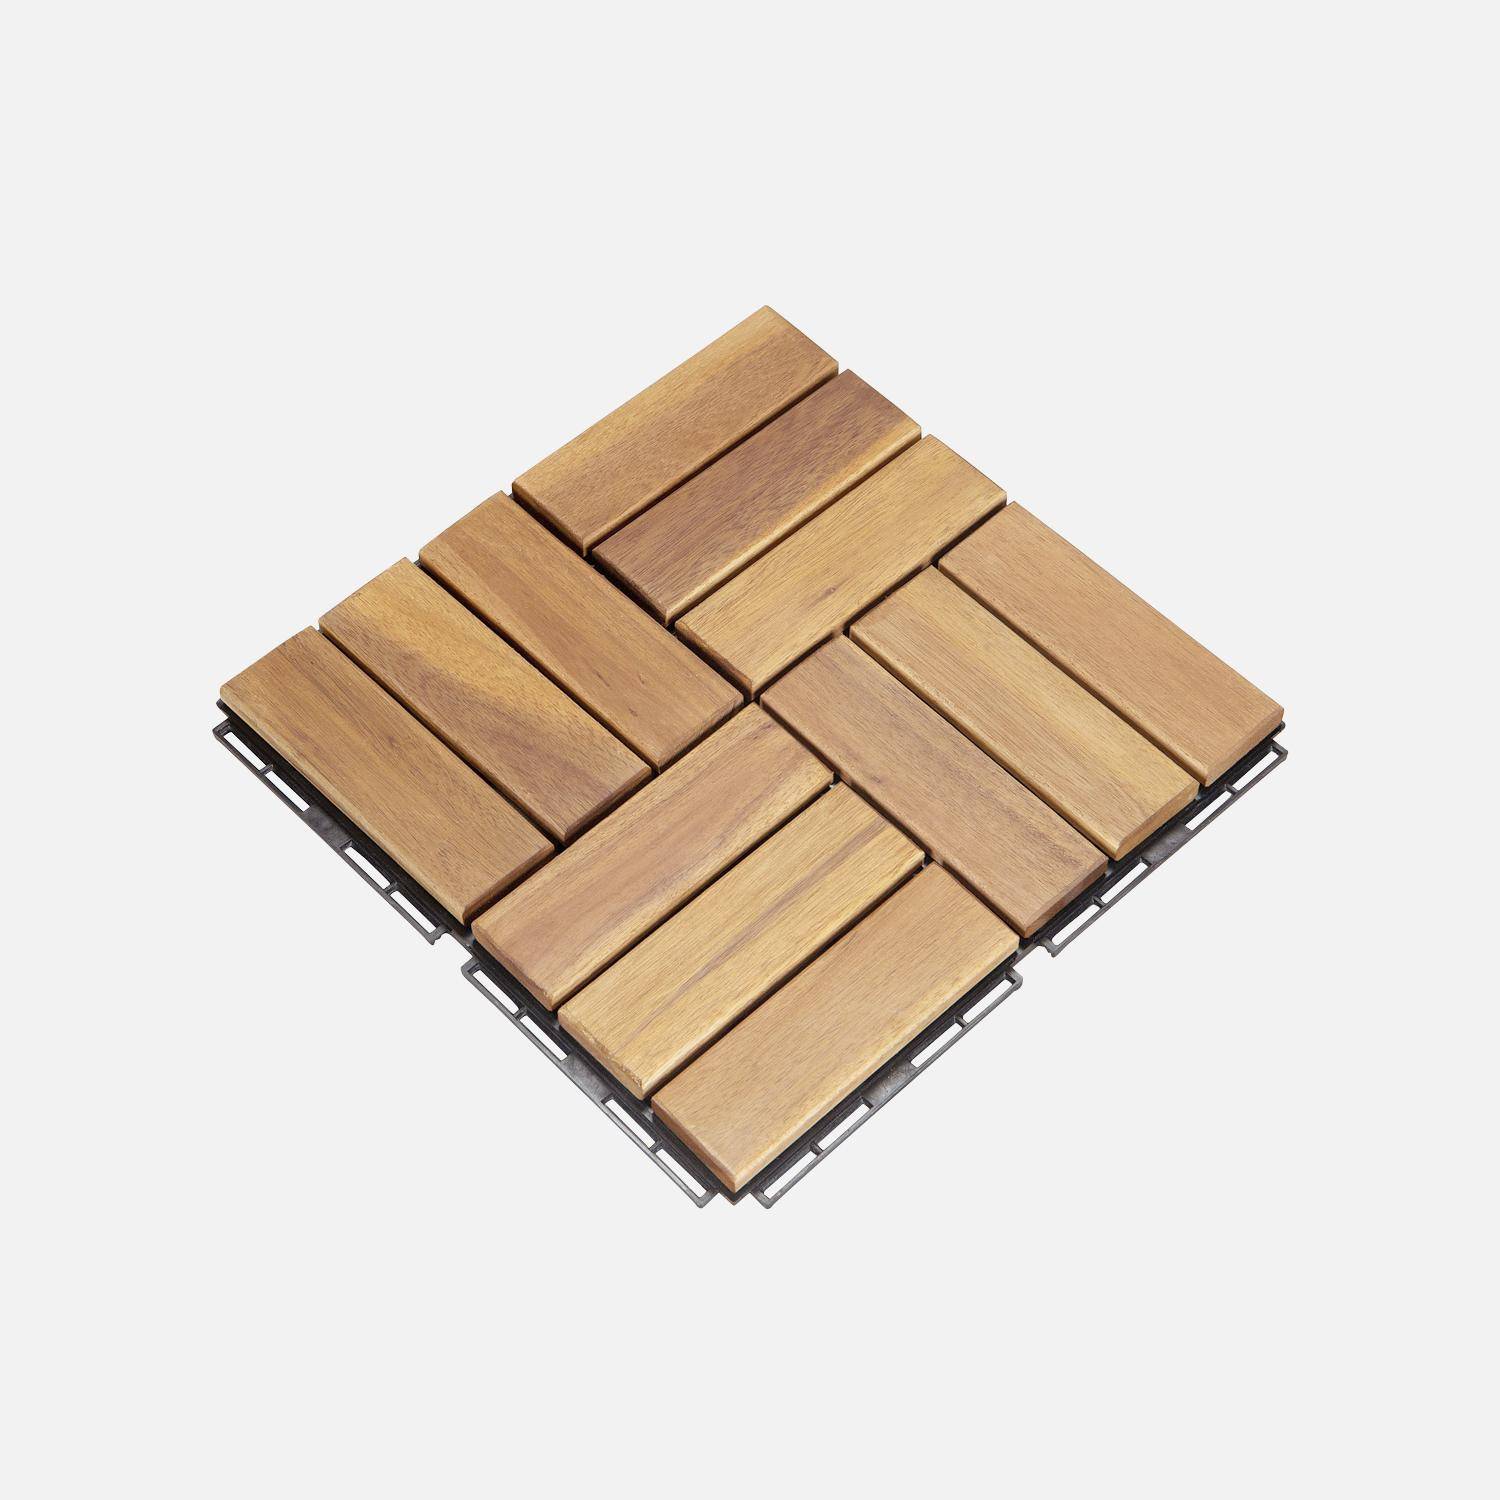 Batch of 36 acacia wood decking tiles 30x30cm, square pattern, clip-on Photo2